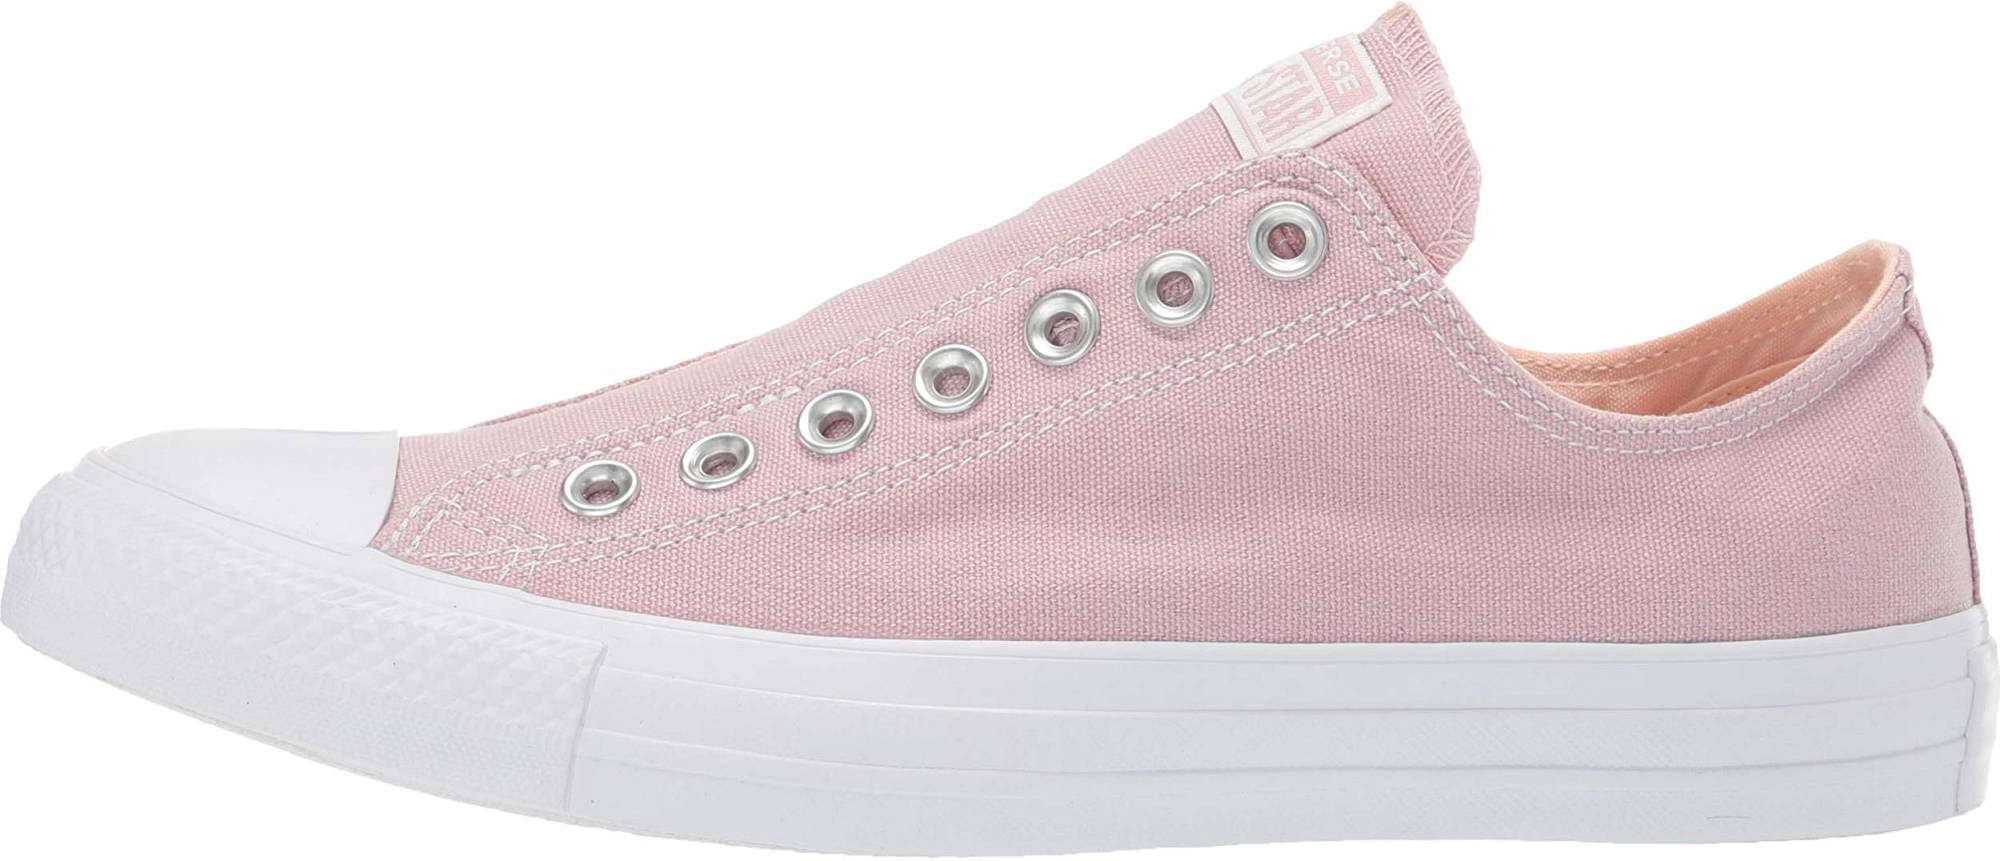 Converse Chuck Taylor All Star Slip – Shoes Reviews & Reasons To Buy